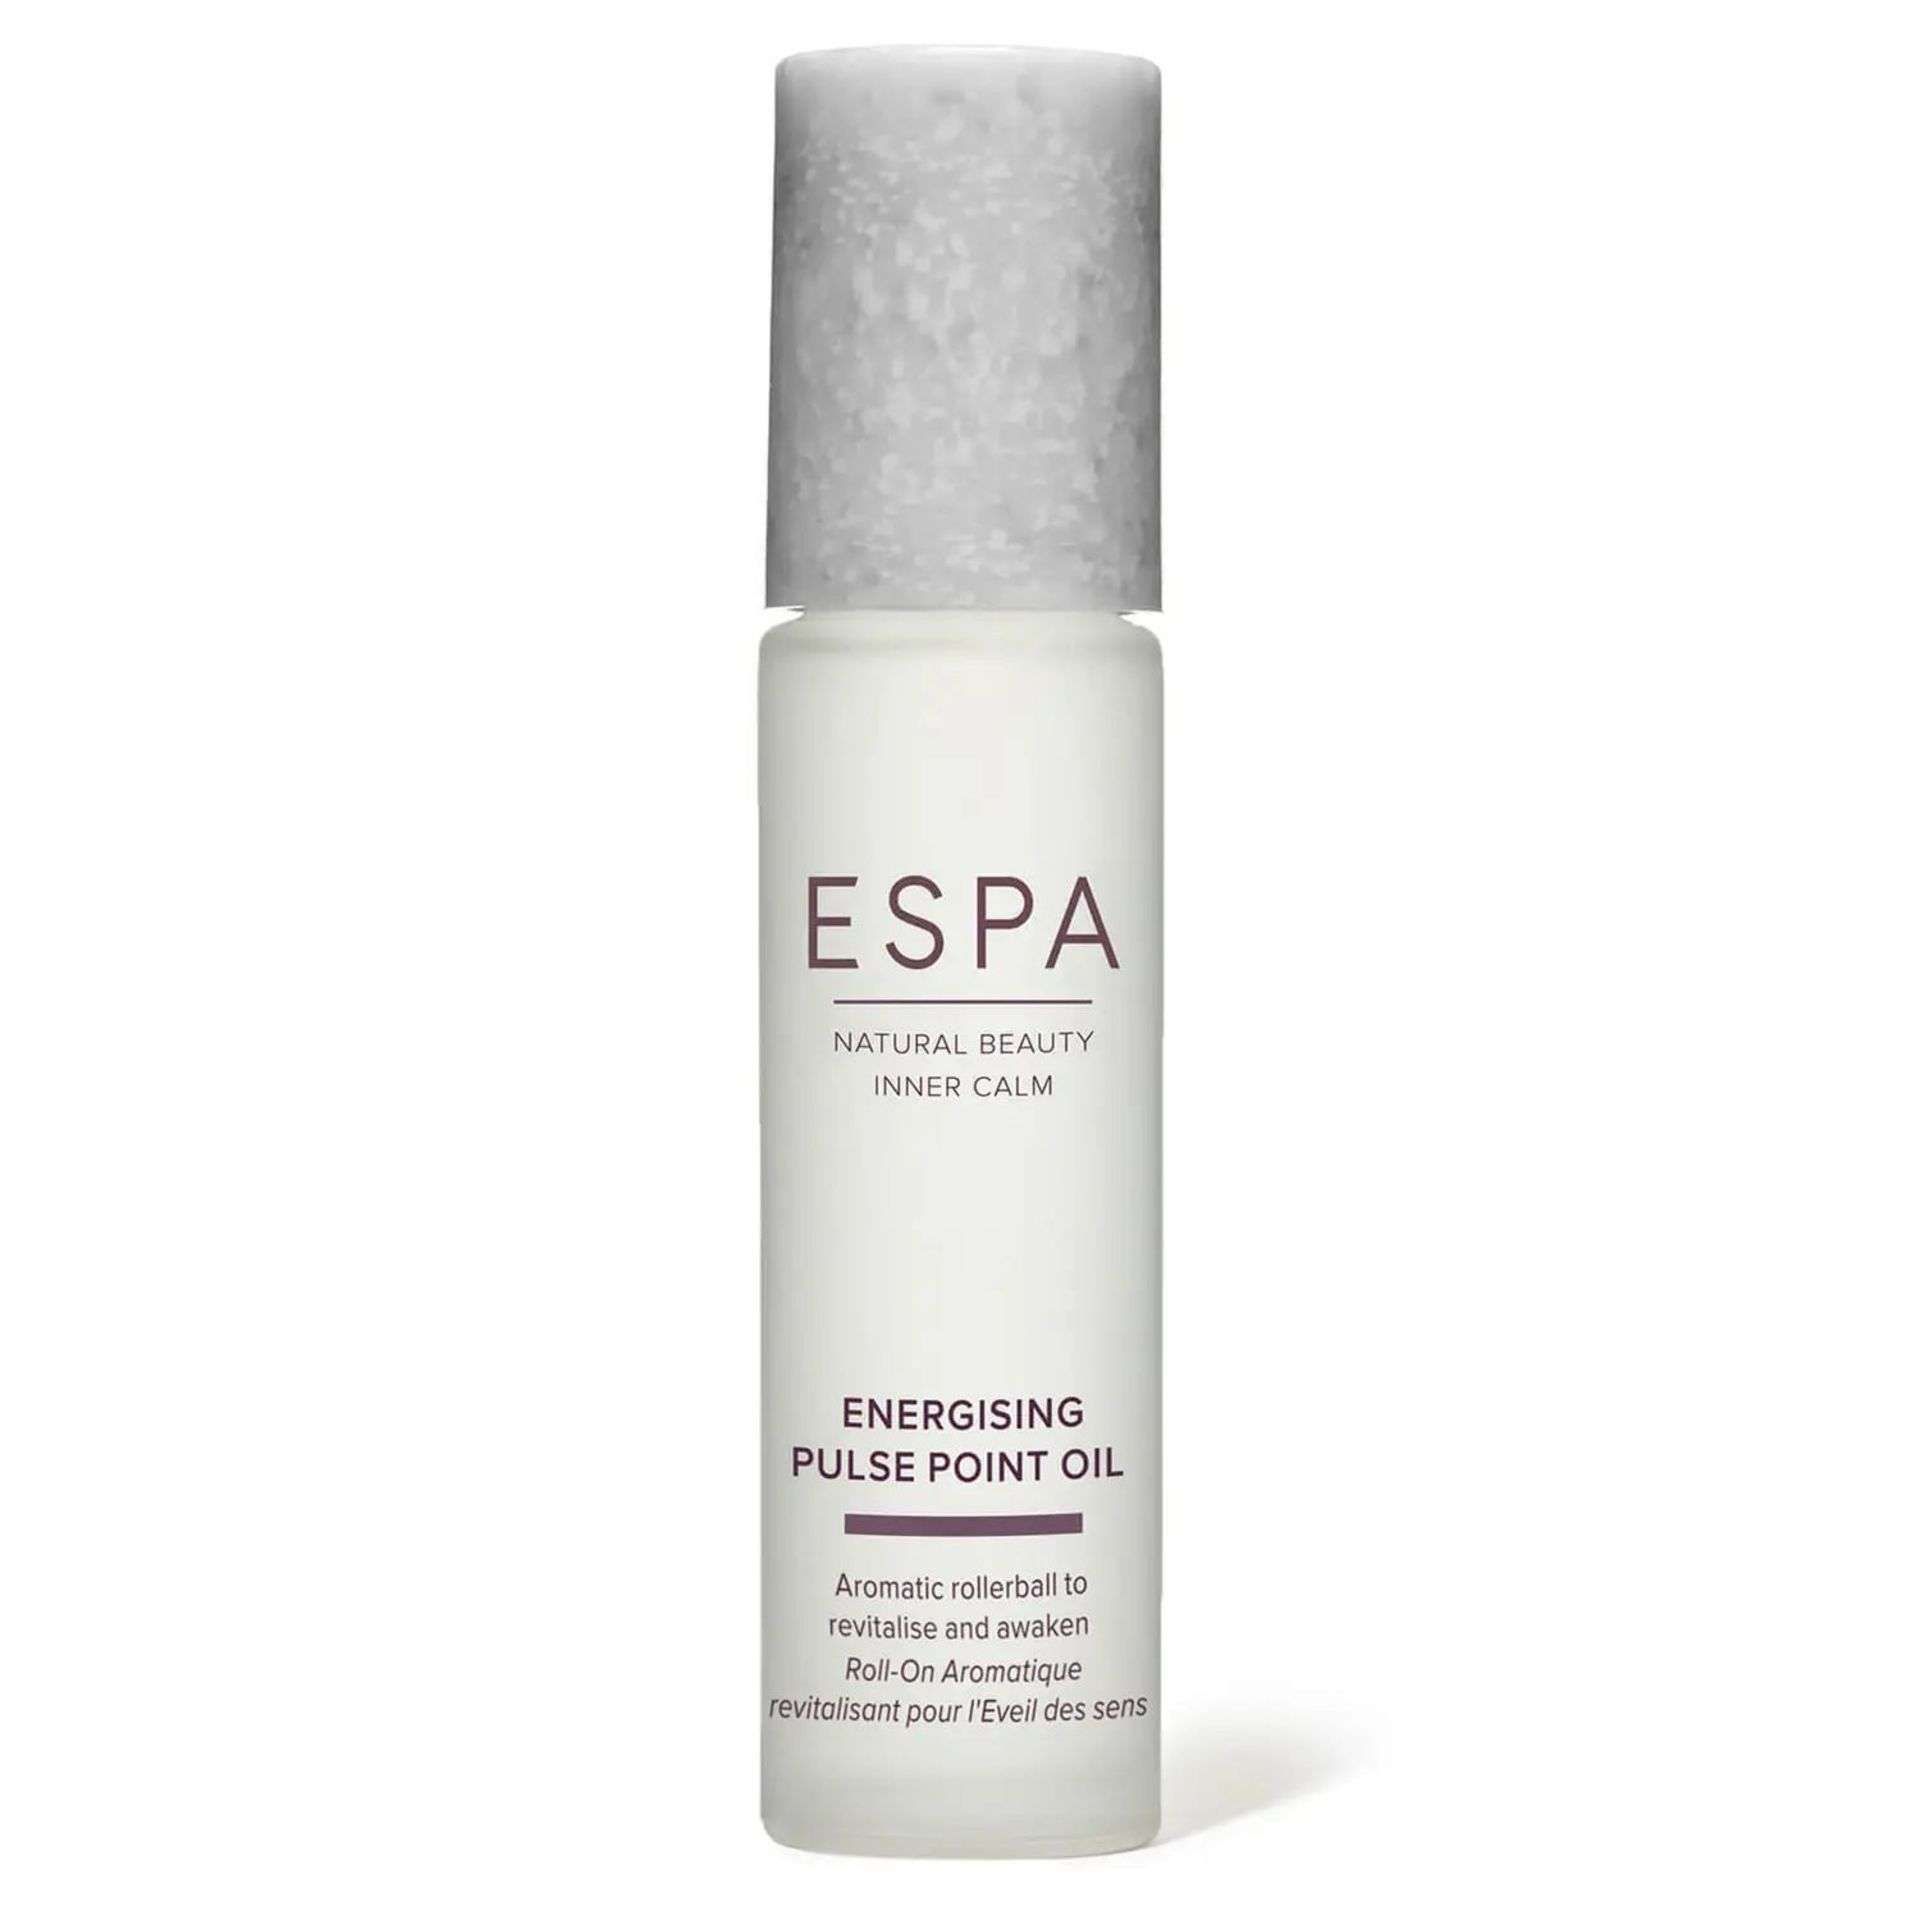 10x BRAND NEW ESPA Energising Pulse Point Oil 9ml RRP £23 EACH. EBR2. A revitalising and zesty blend